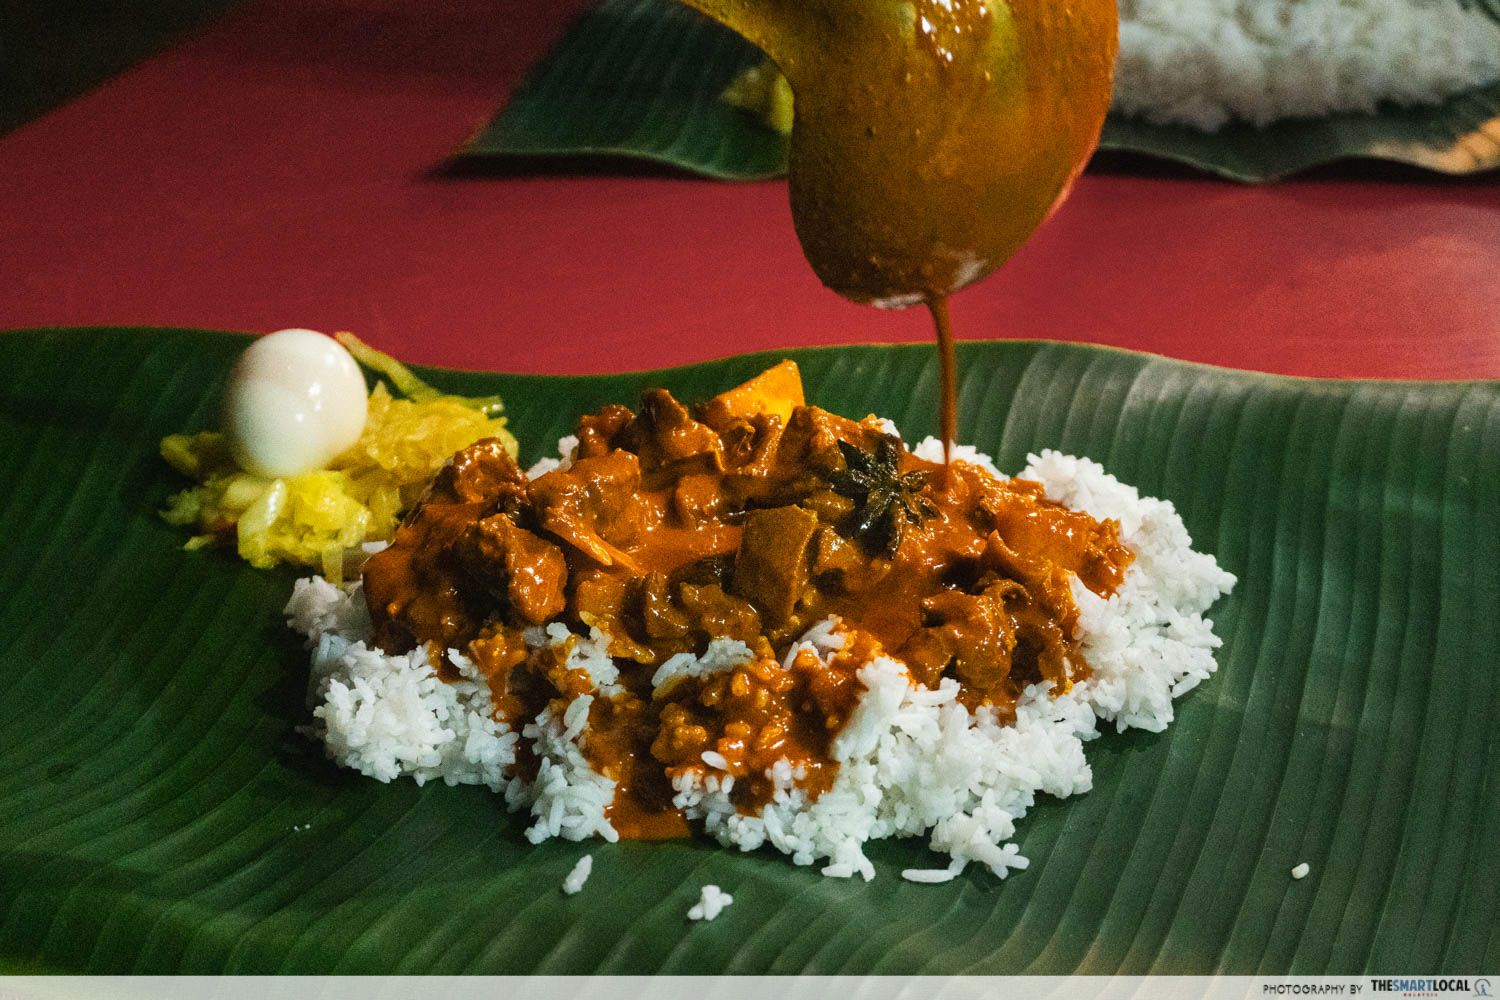 mutton curry is ladled onto white rice